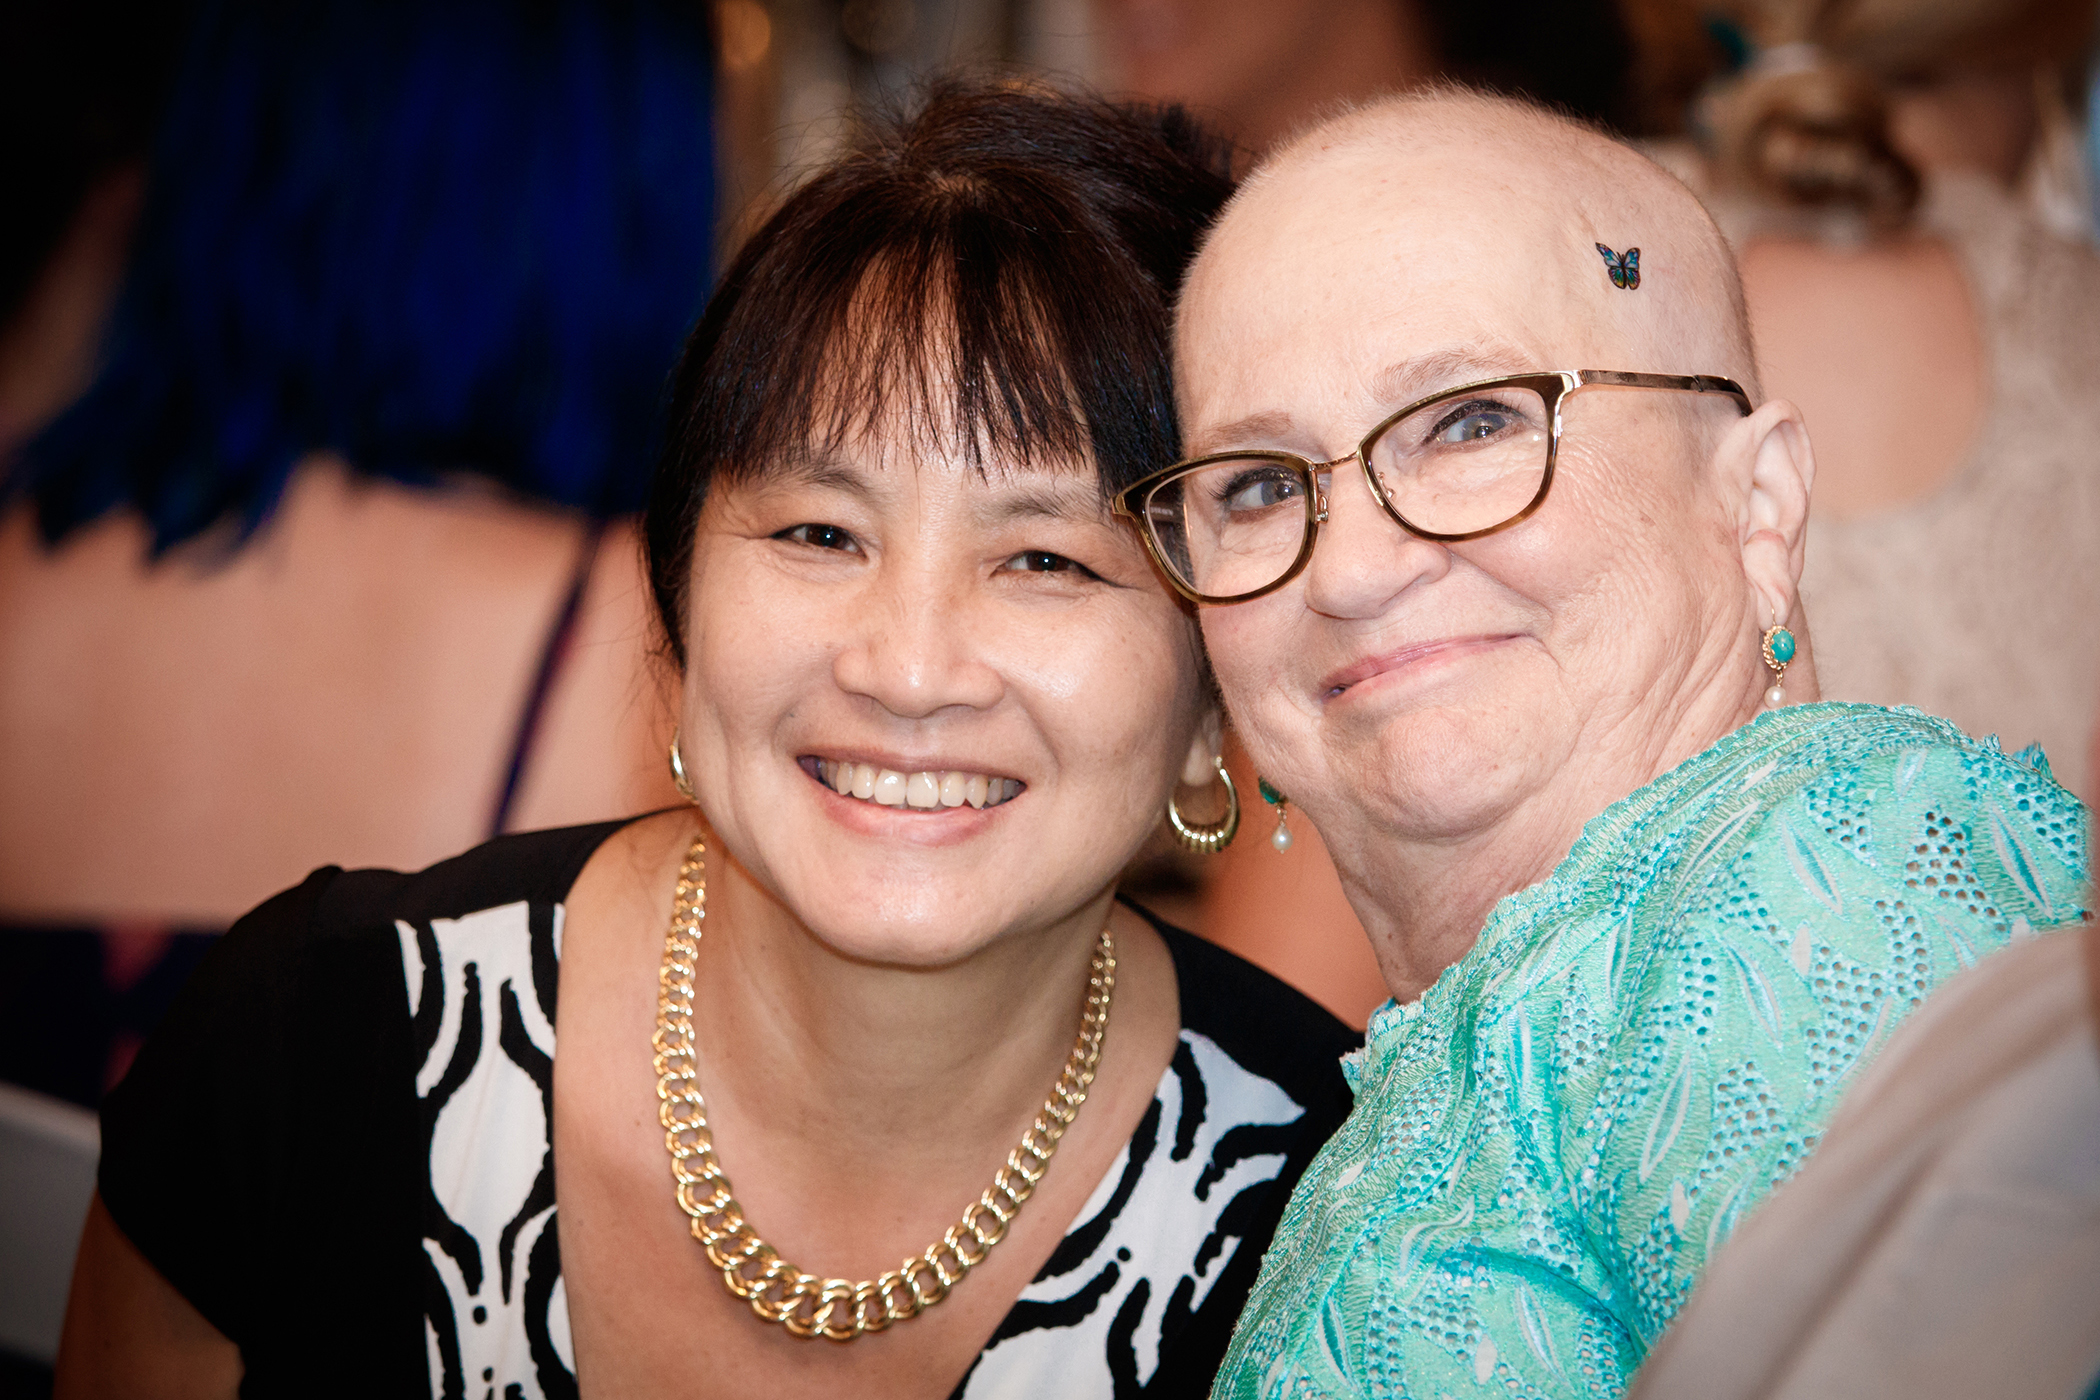 Grateful patient gives back to support ovarian cancer research ...